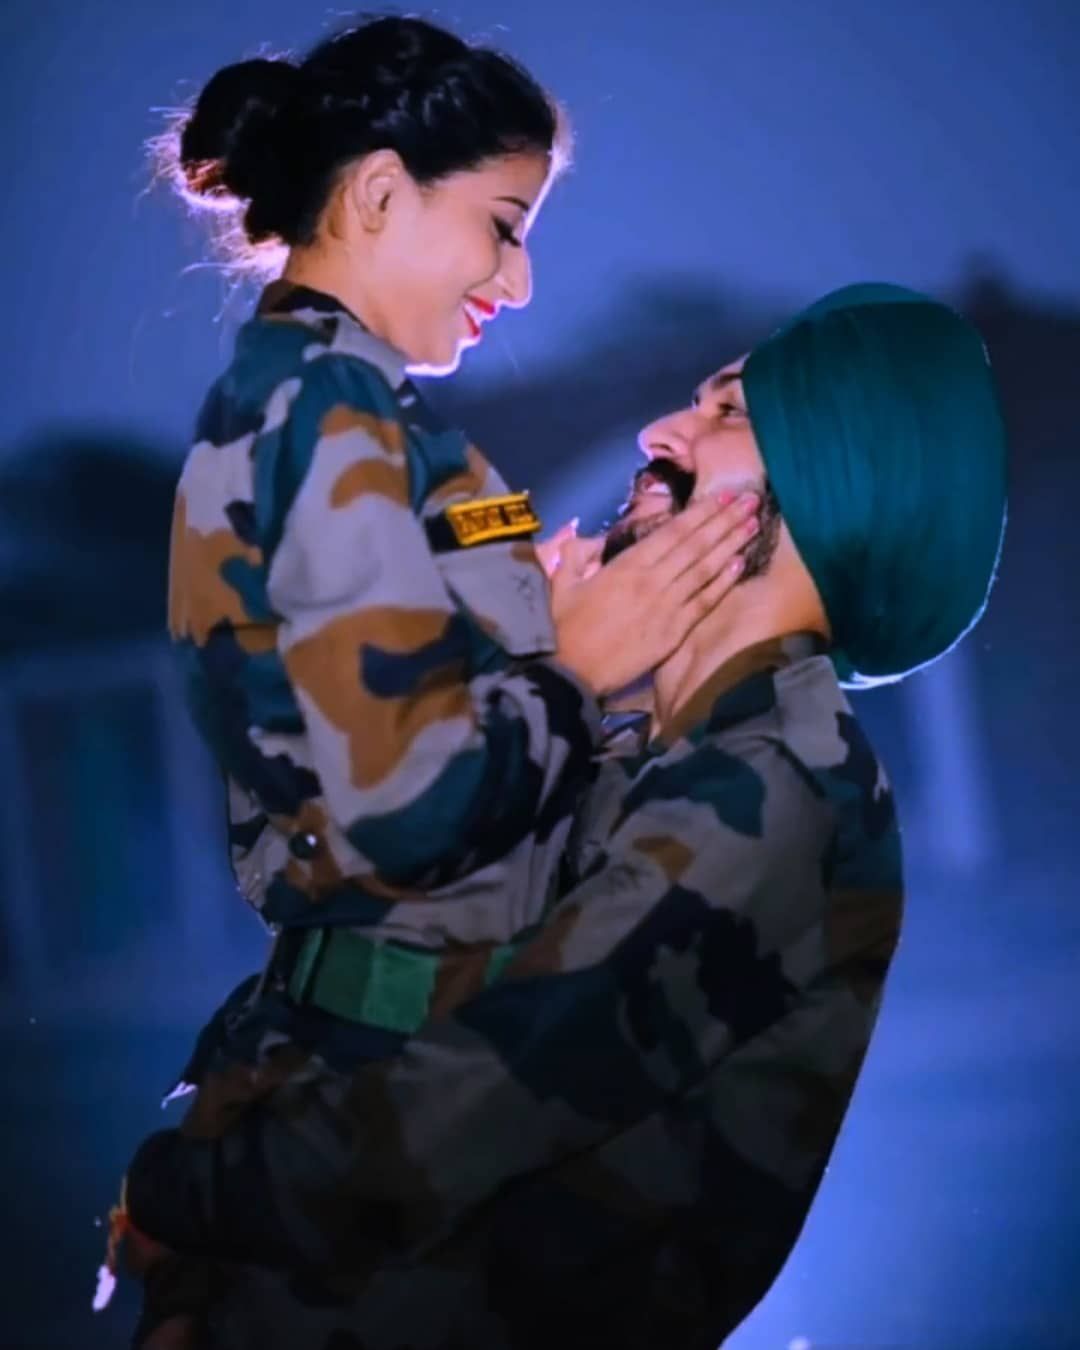 Indian Army Couple. Indian Army Girlfriend. Indian Army Lovers. Army girlfriend picture, Army couple, Army girlfriend